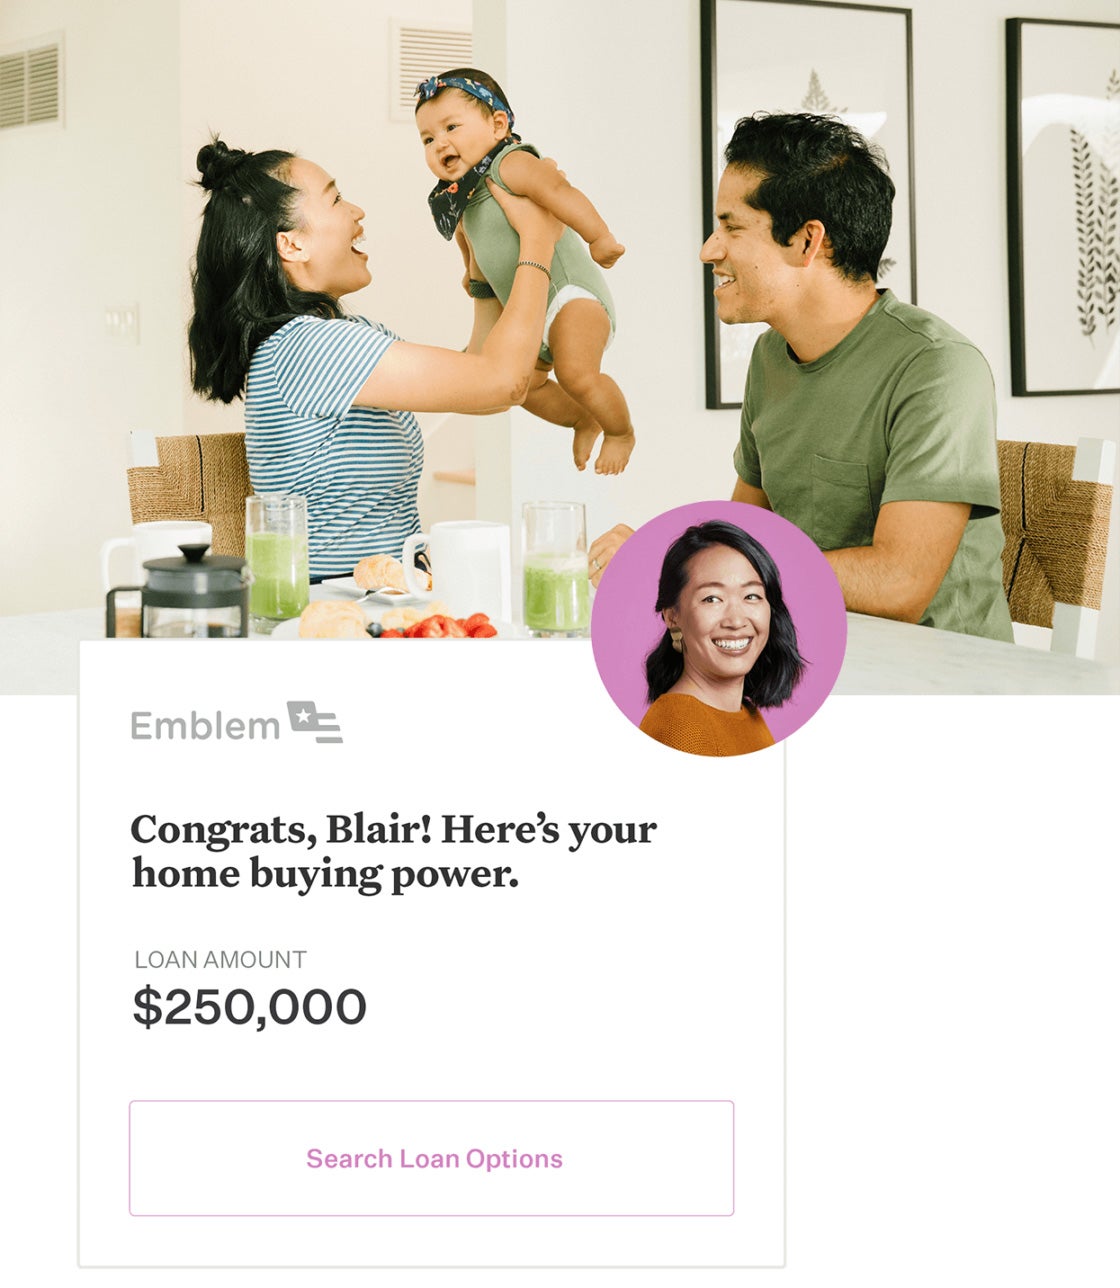 Preview of loan options application on mobile app below image of woman and man holding a baby in the air